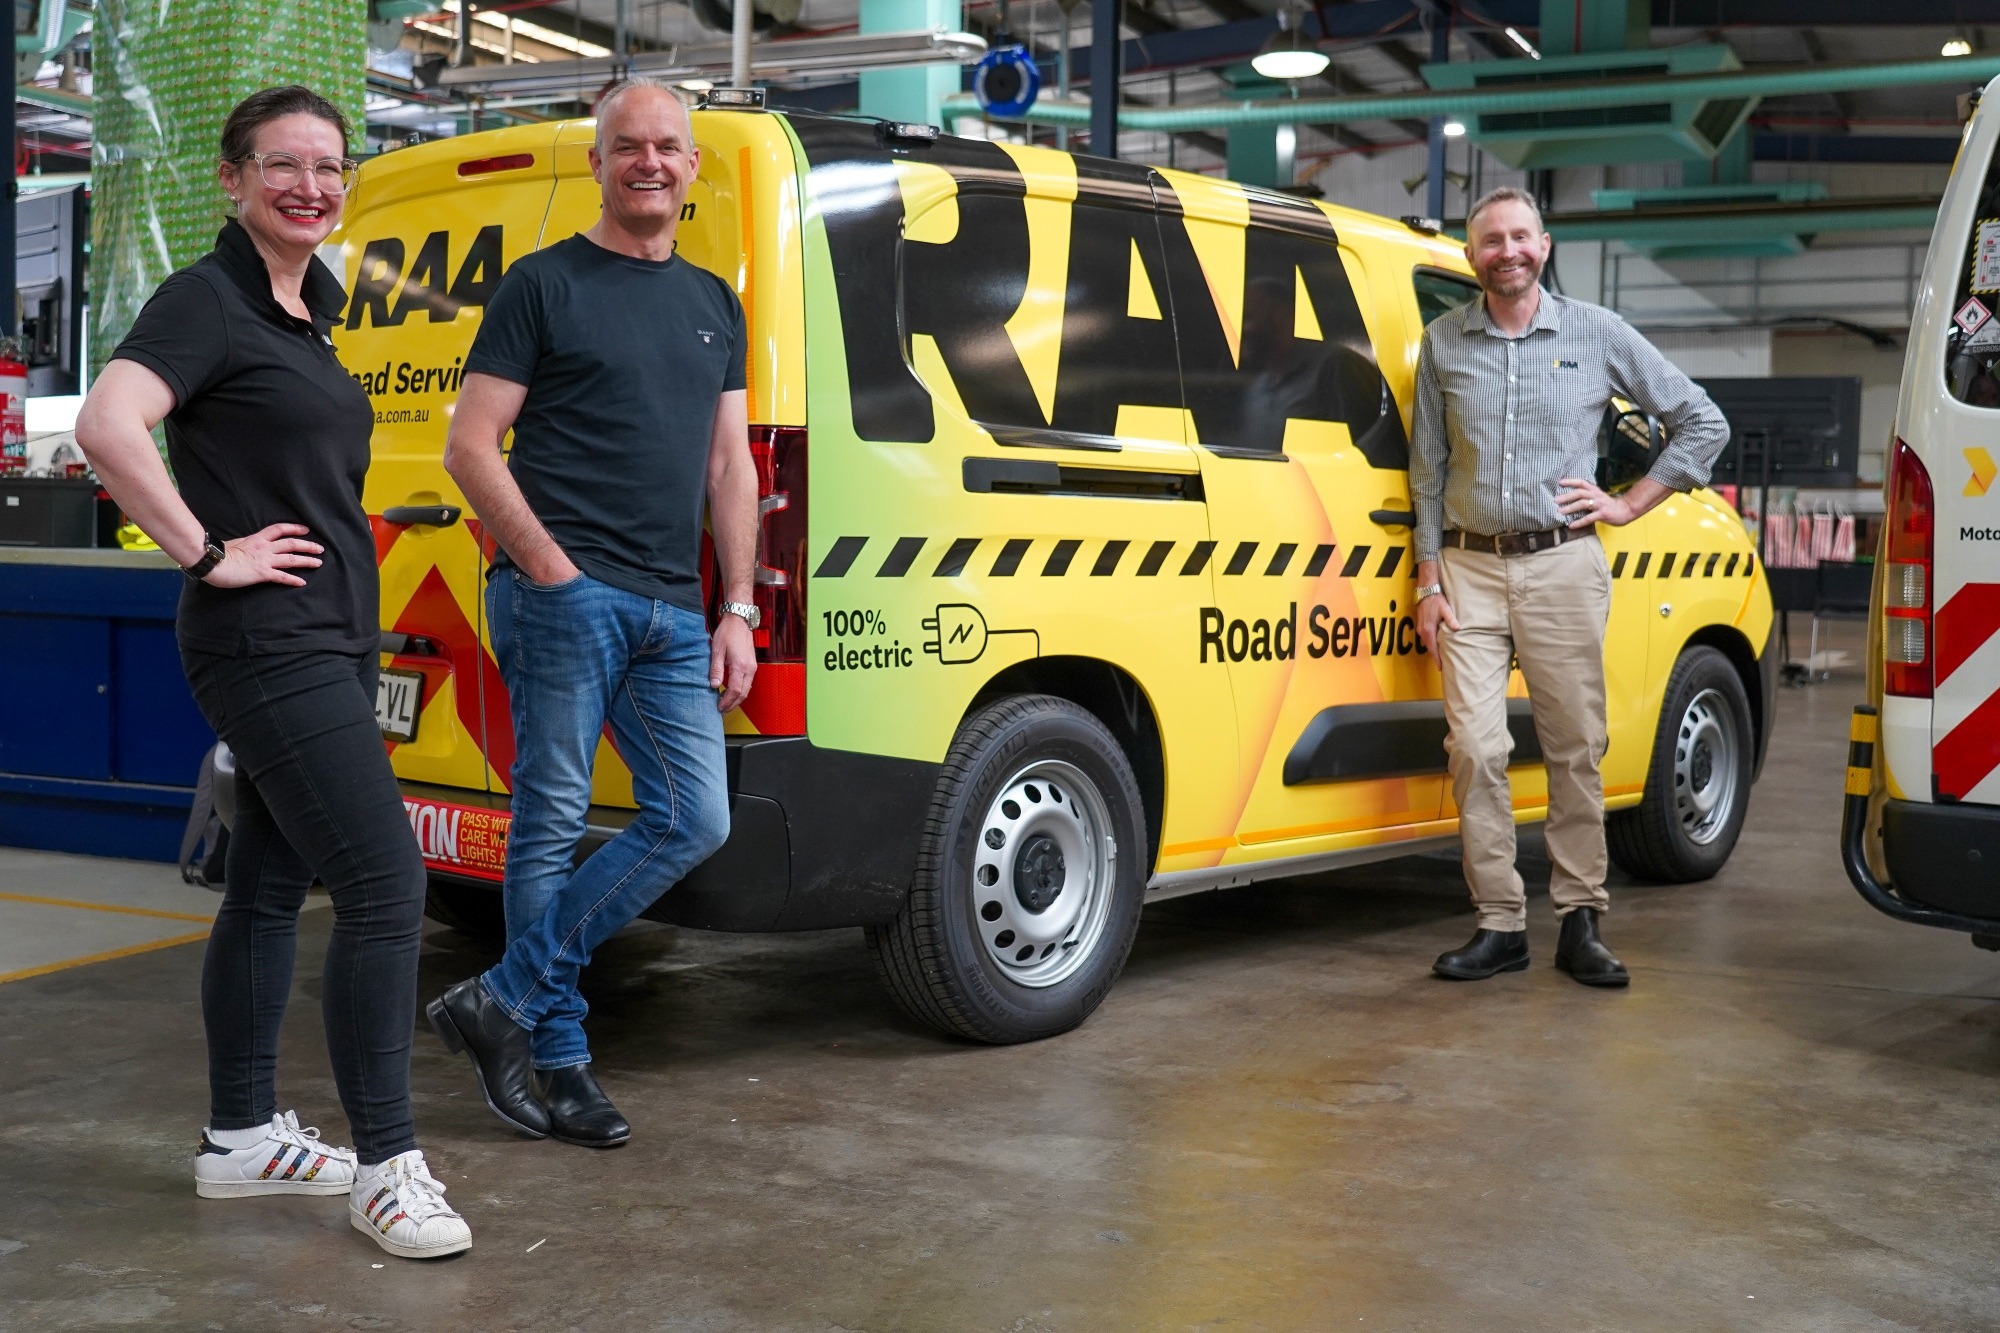 RAA launches new electric patrol van along with mobile EV charging service